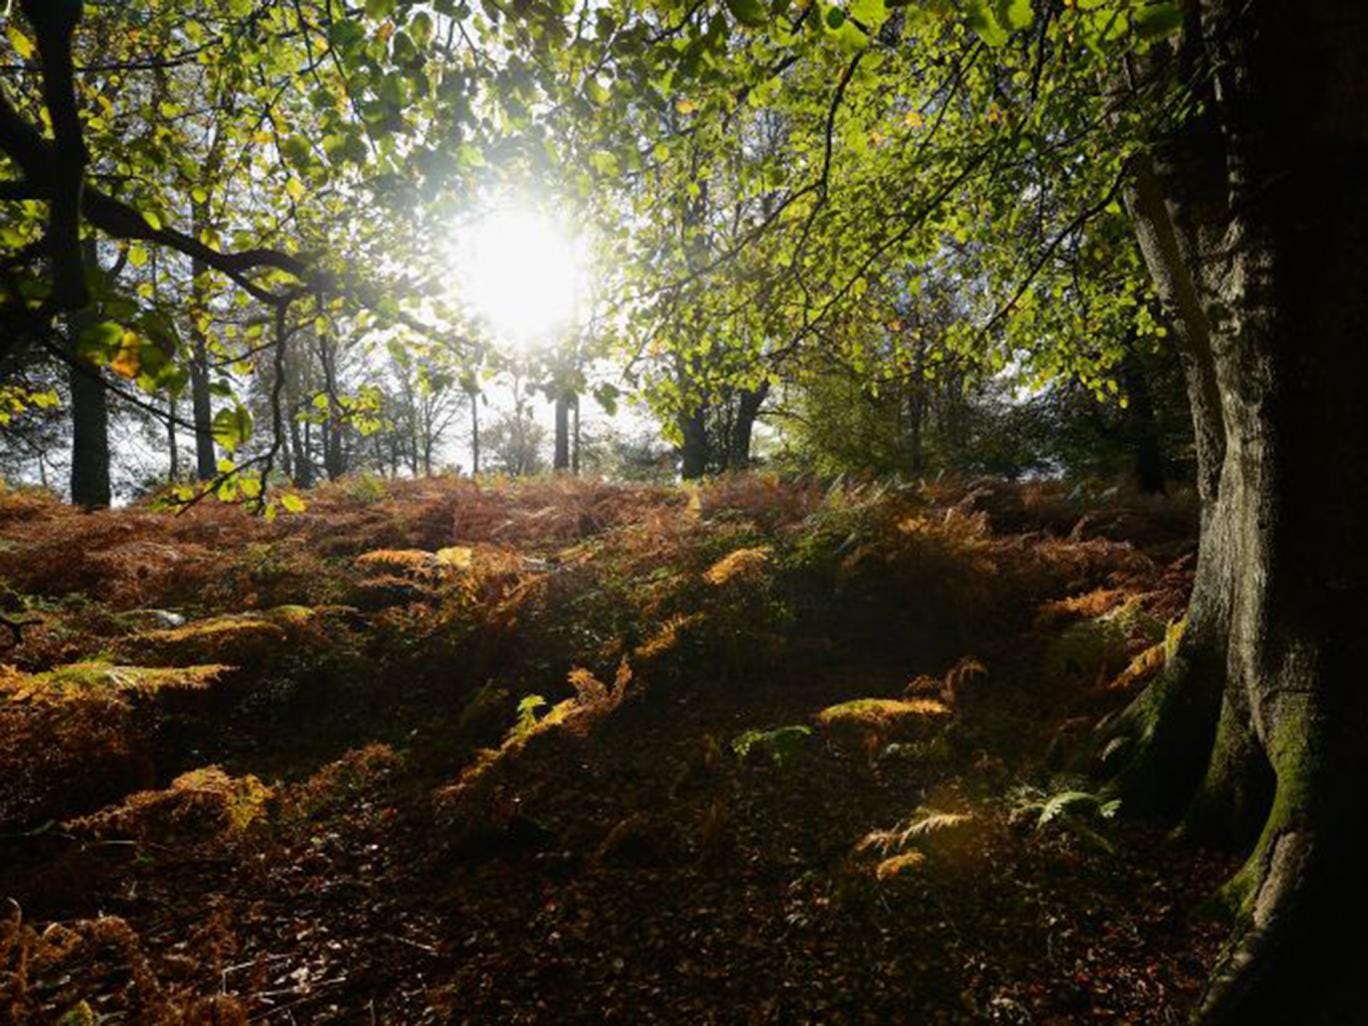 The New Forest; it is feared that Britain’s forests could suffer a similar fate to woodlands in much of the US, where vast stands of trees have been wiped out by beetles